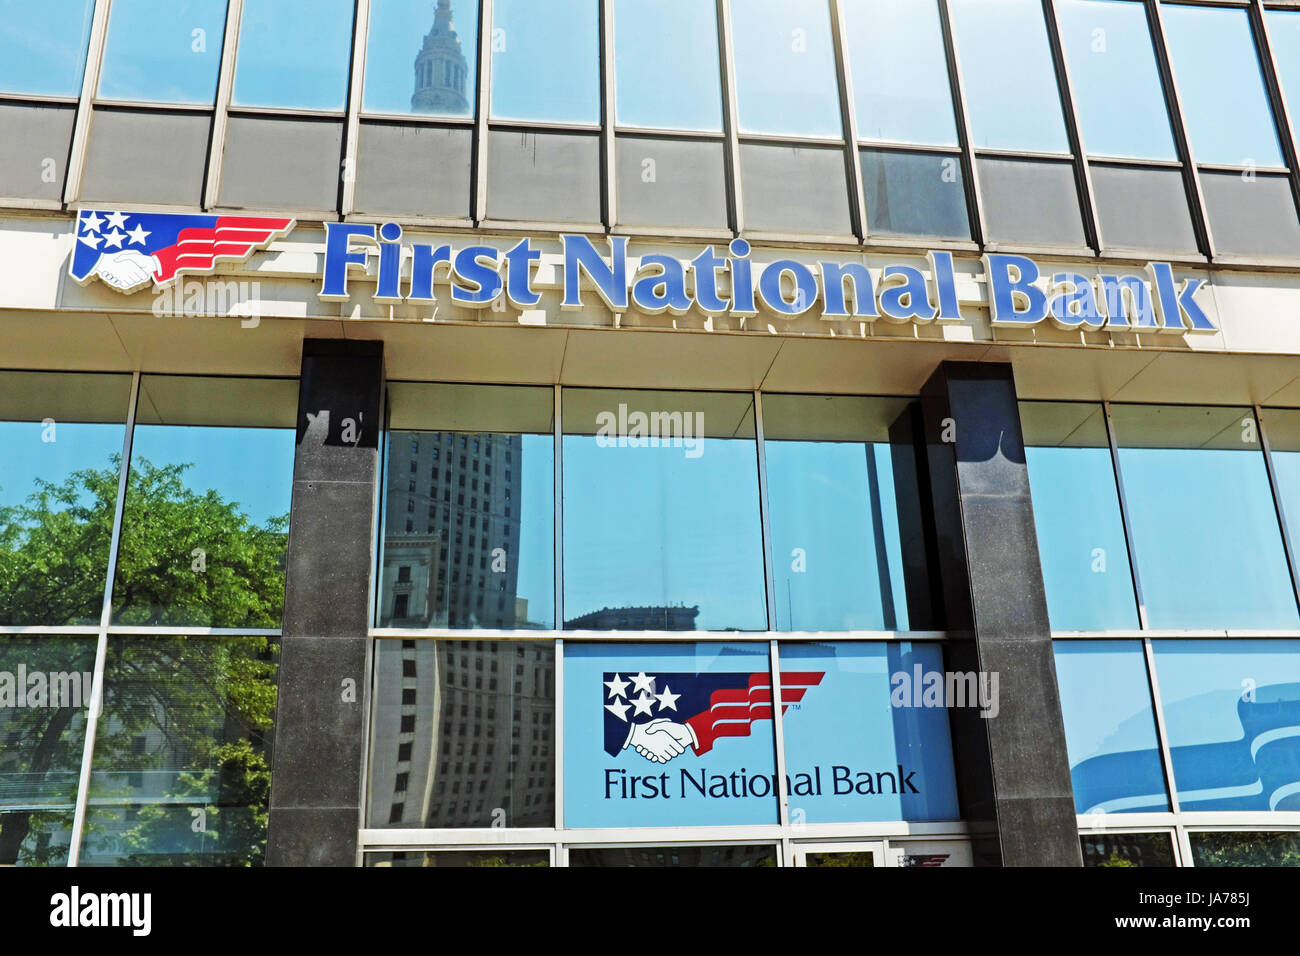 First National Bank on Public Square in downtown Cleveland, Ohio, USA. Stock Photo